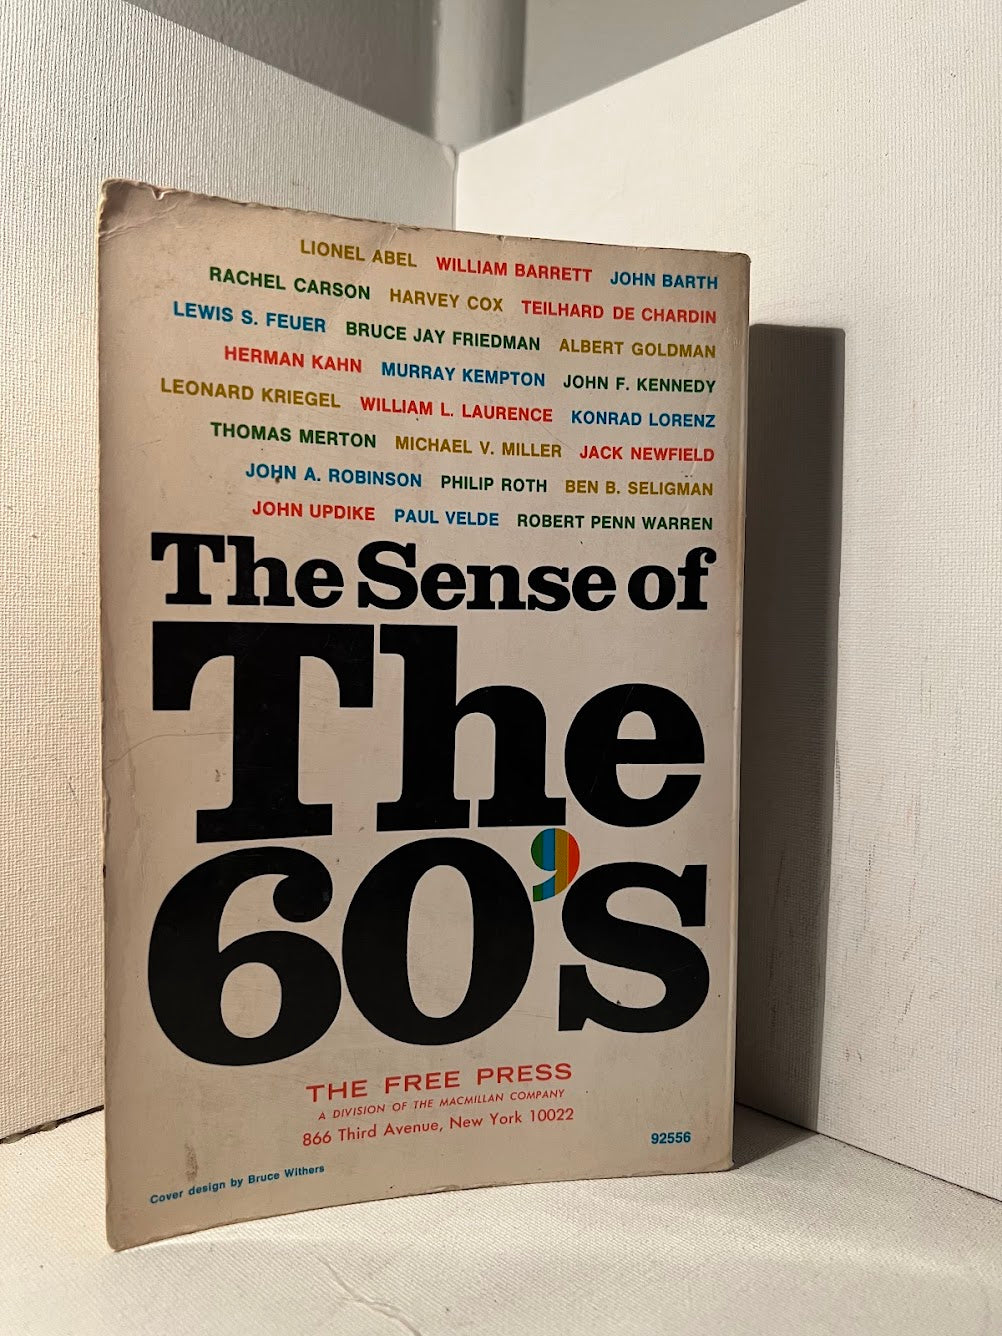 The Sense of the 60's edited by Edward Quinn and Paul J. Dolan